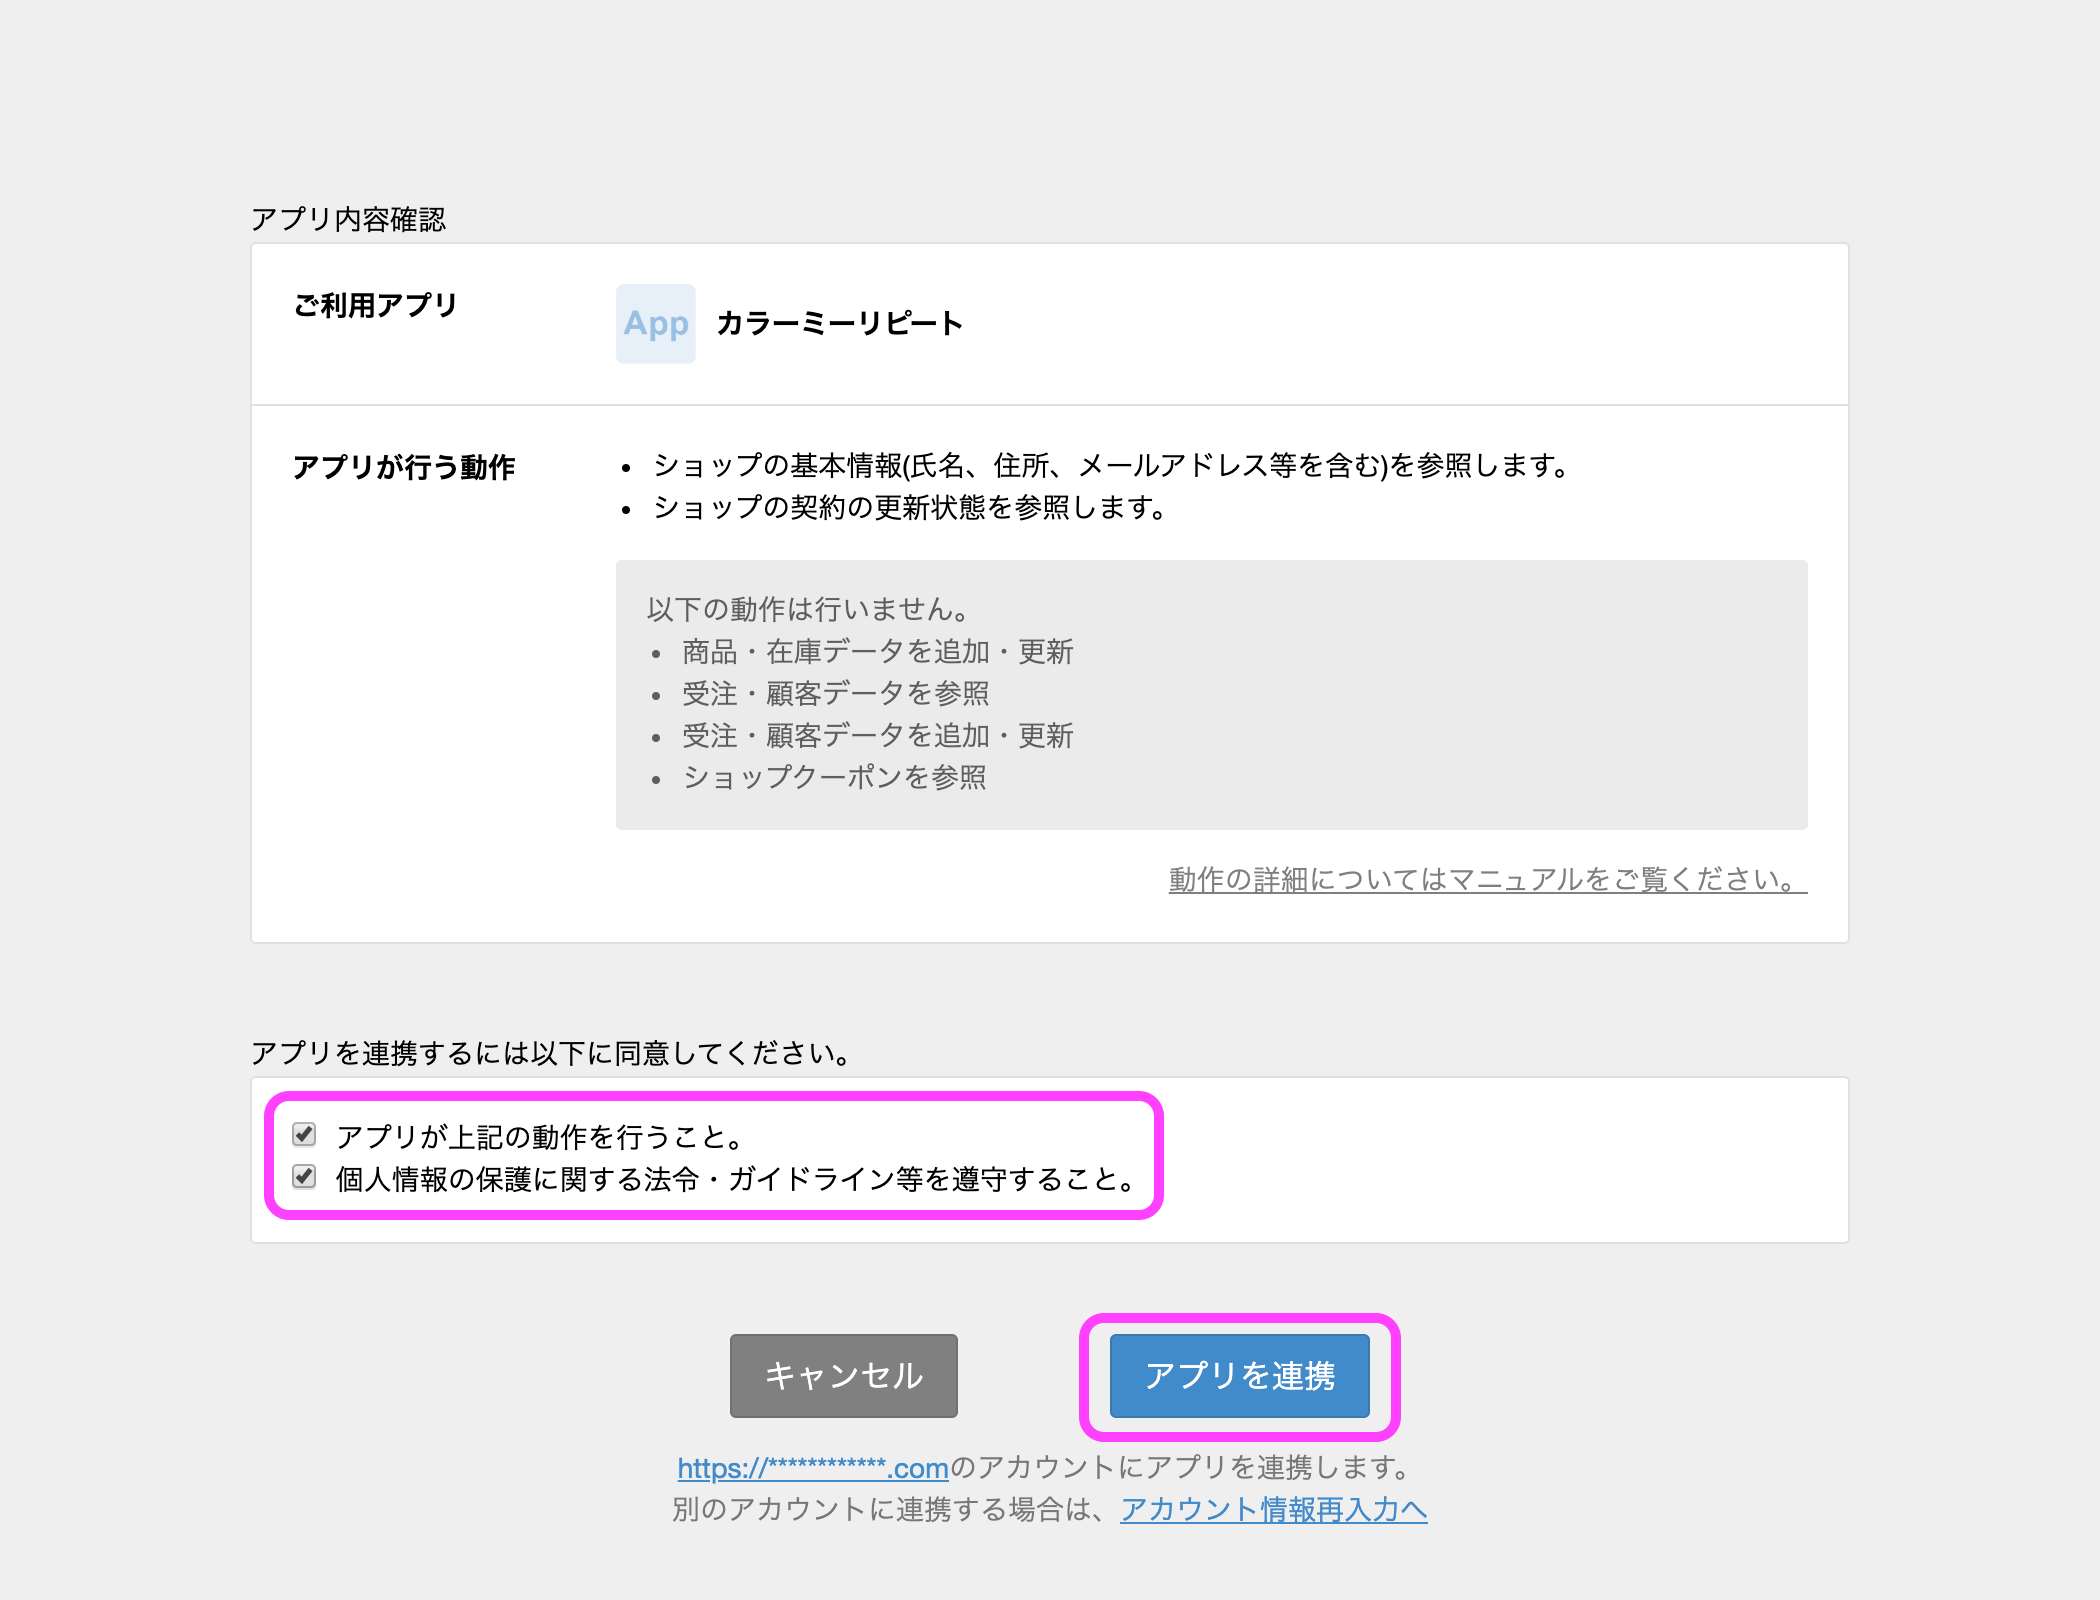 api-staging.shop-pro.jp_oauth_authorize_client_id_3f8a0ed39bfa1cecfaf73bbdea3a685fab6299f59fb1ce3afe1896af91599b85_redirect_uri_https___quokka-web-admin-staging.herokuapp.com_setting_colormeshop_callback_response_type_code_scope_read_co__1_.png